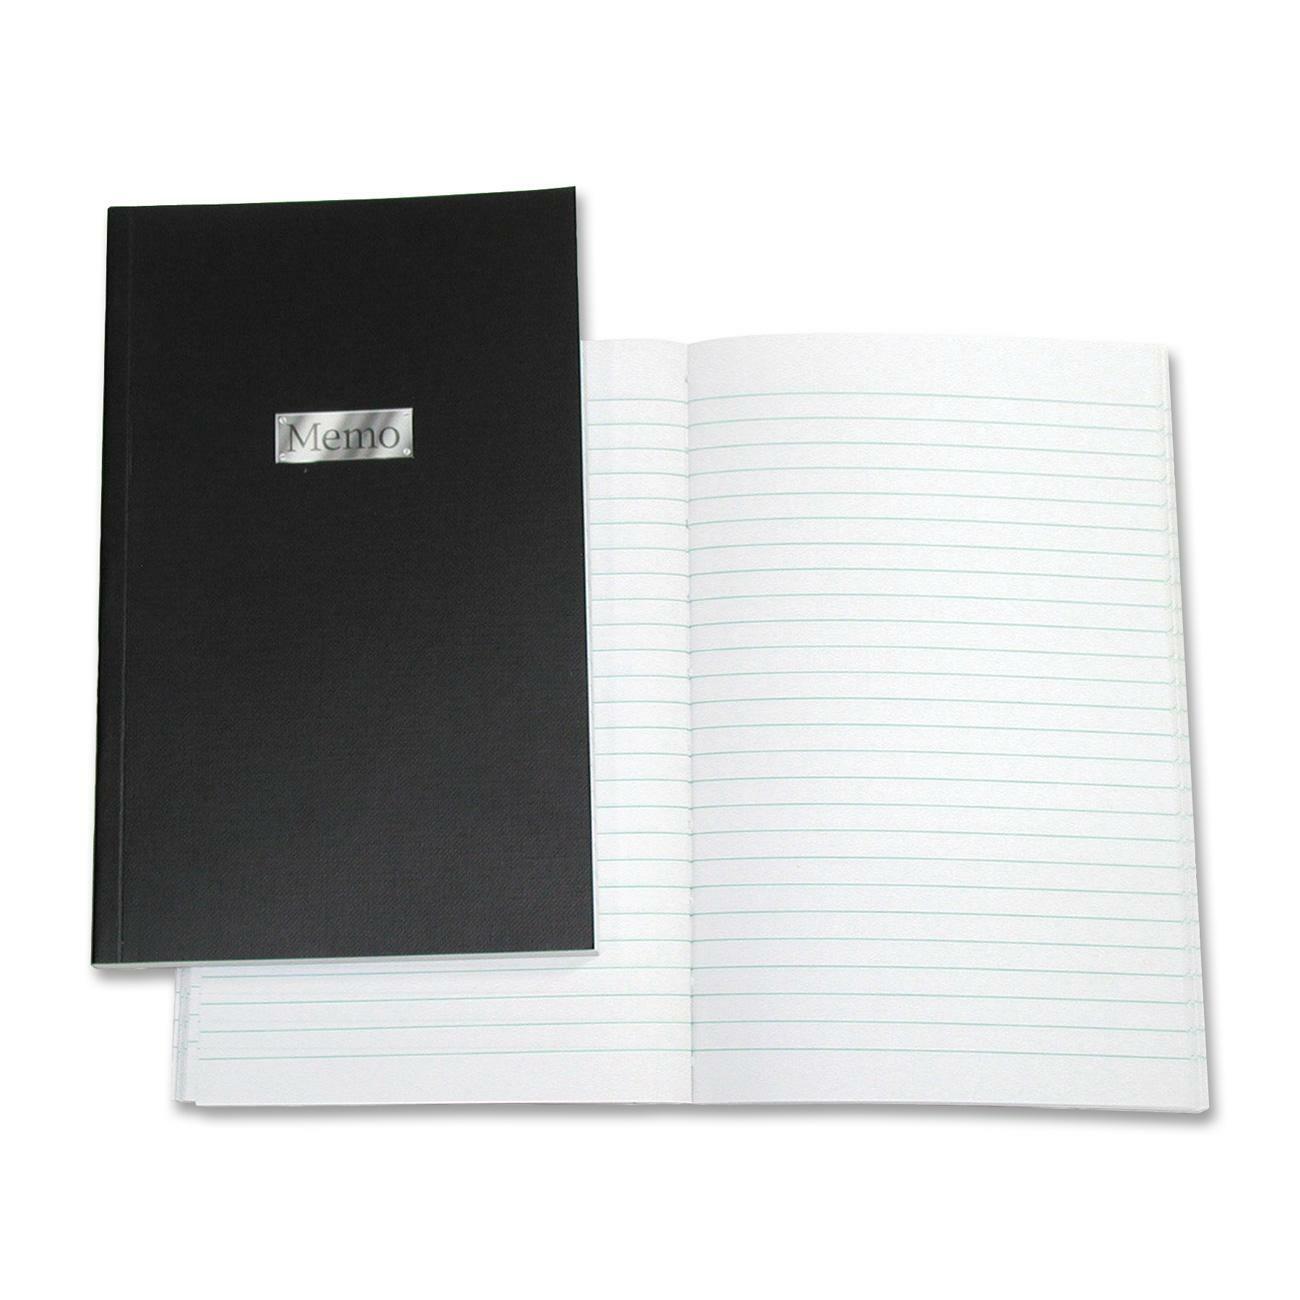 Winnable Open Side Memo Book - 96 Sheets - Sewn - 4" x 6 3/4" - White Paper - Black Cover - Flexible Cover -  Each